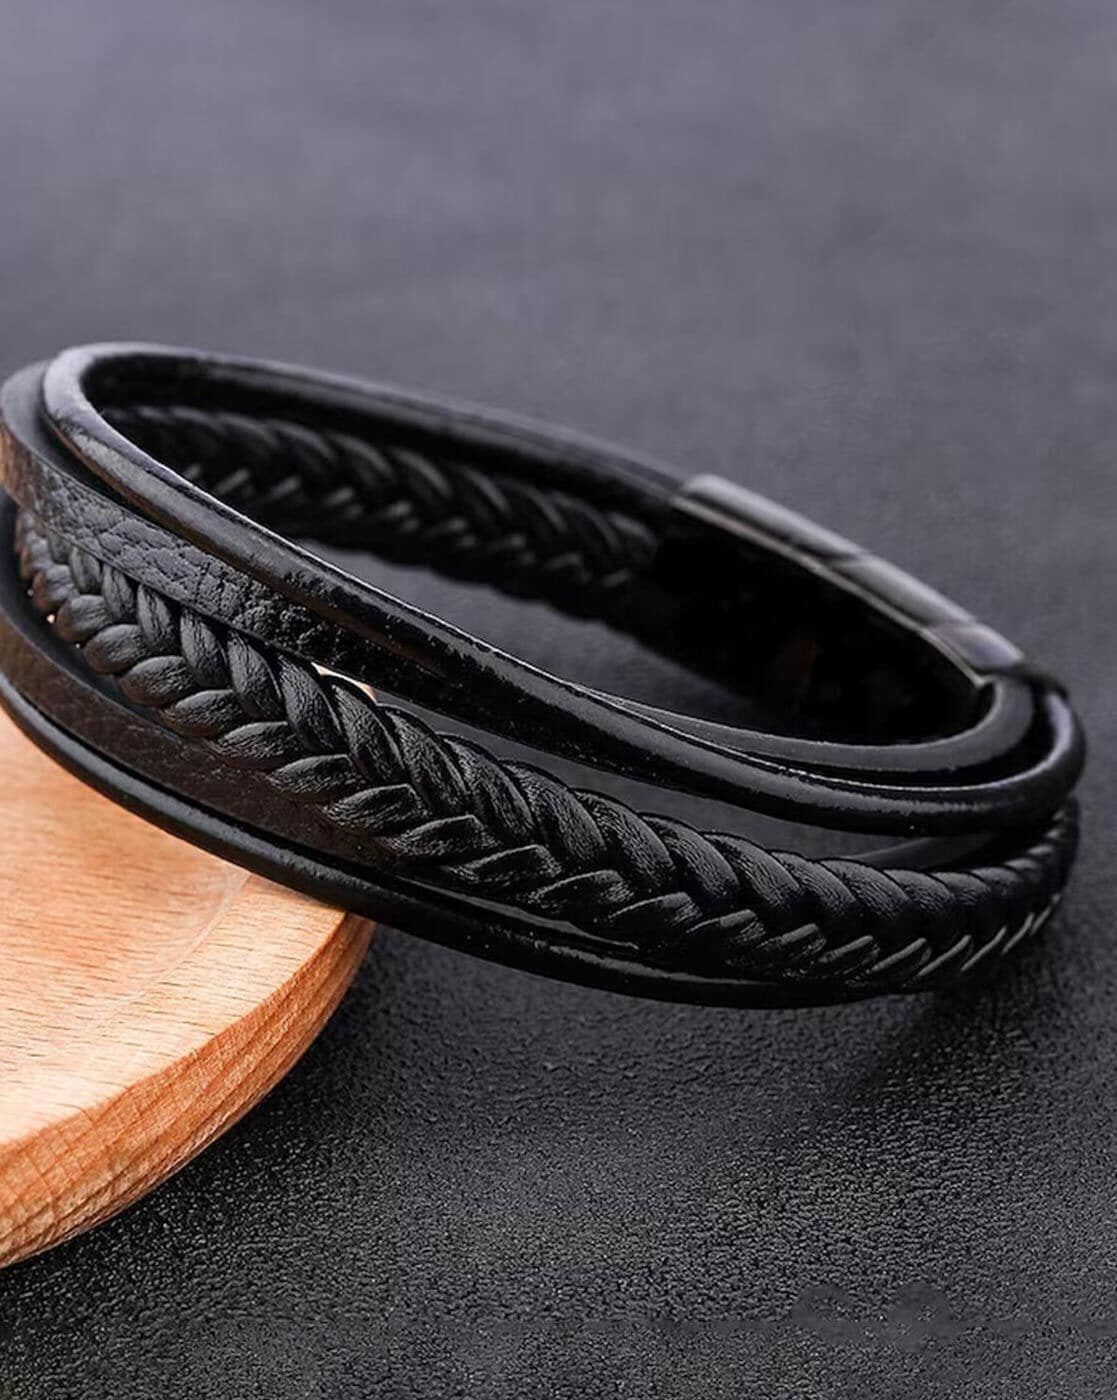 Buy Retro Punk Men Bracelets Black Brown Braided Leather Bracelet Stainless  Steel Magnetic Clasp Bangles Male Jewelry Gift at affordable prices  free  shipping real reviews with photos  Joom